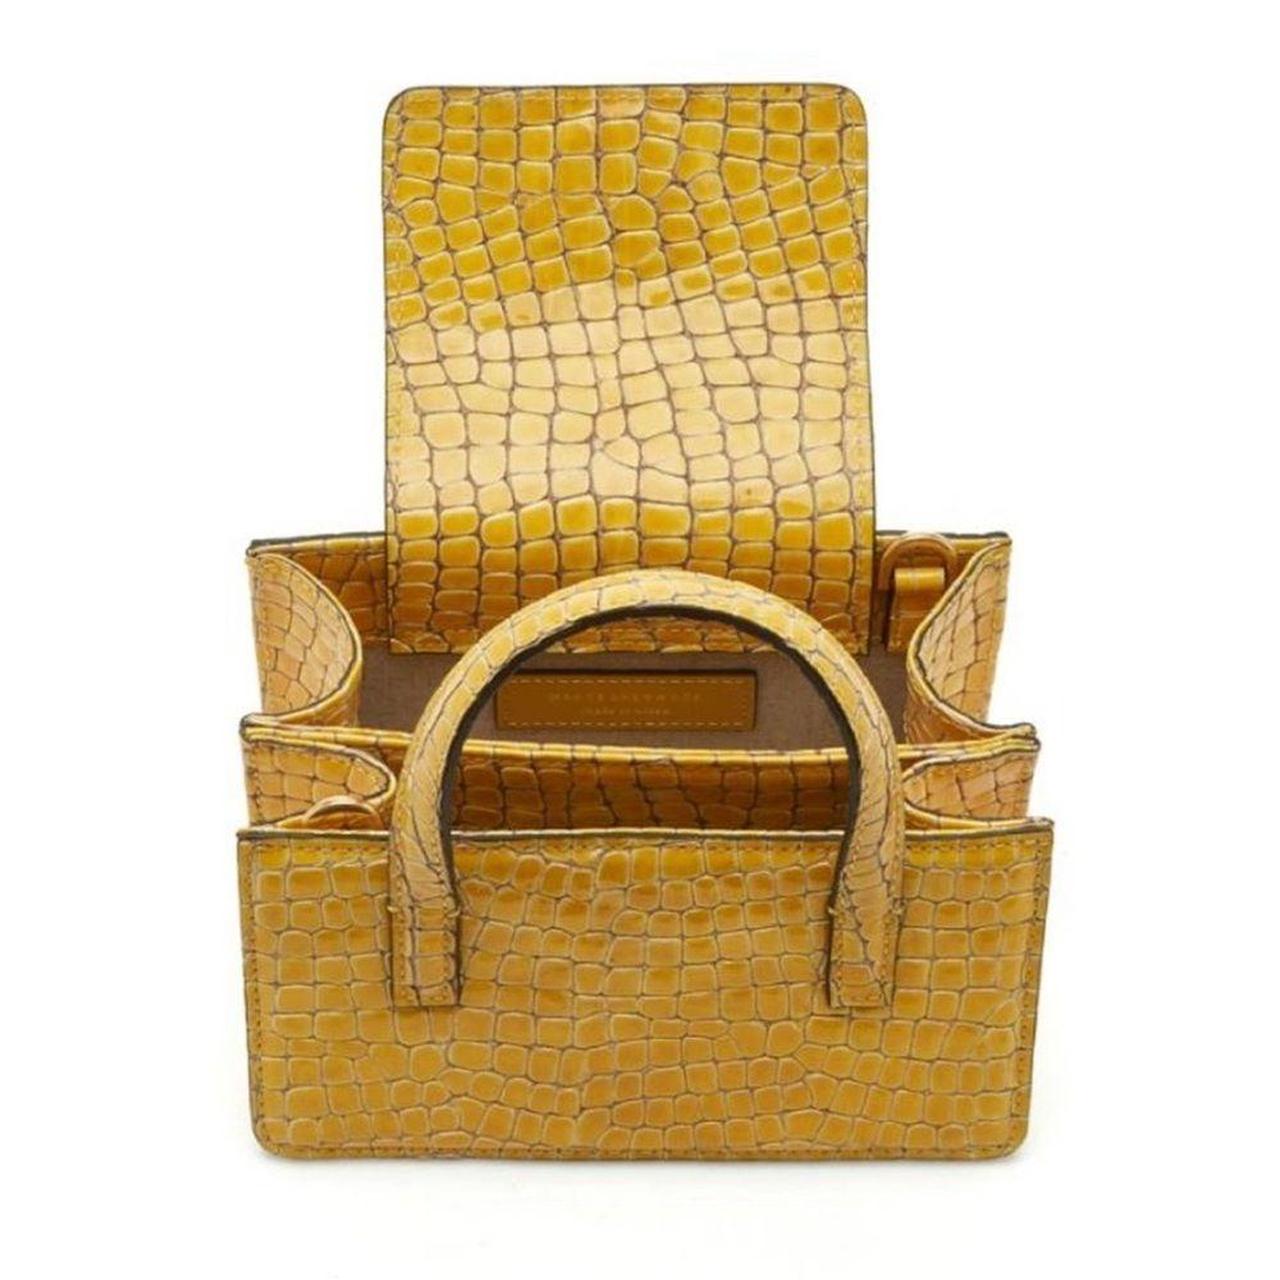 MARGE SHERWOOD NEW Mini Square Croc-Embossed Leather Top Handle Bag $405